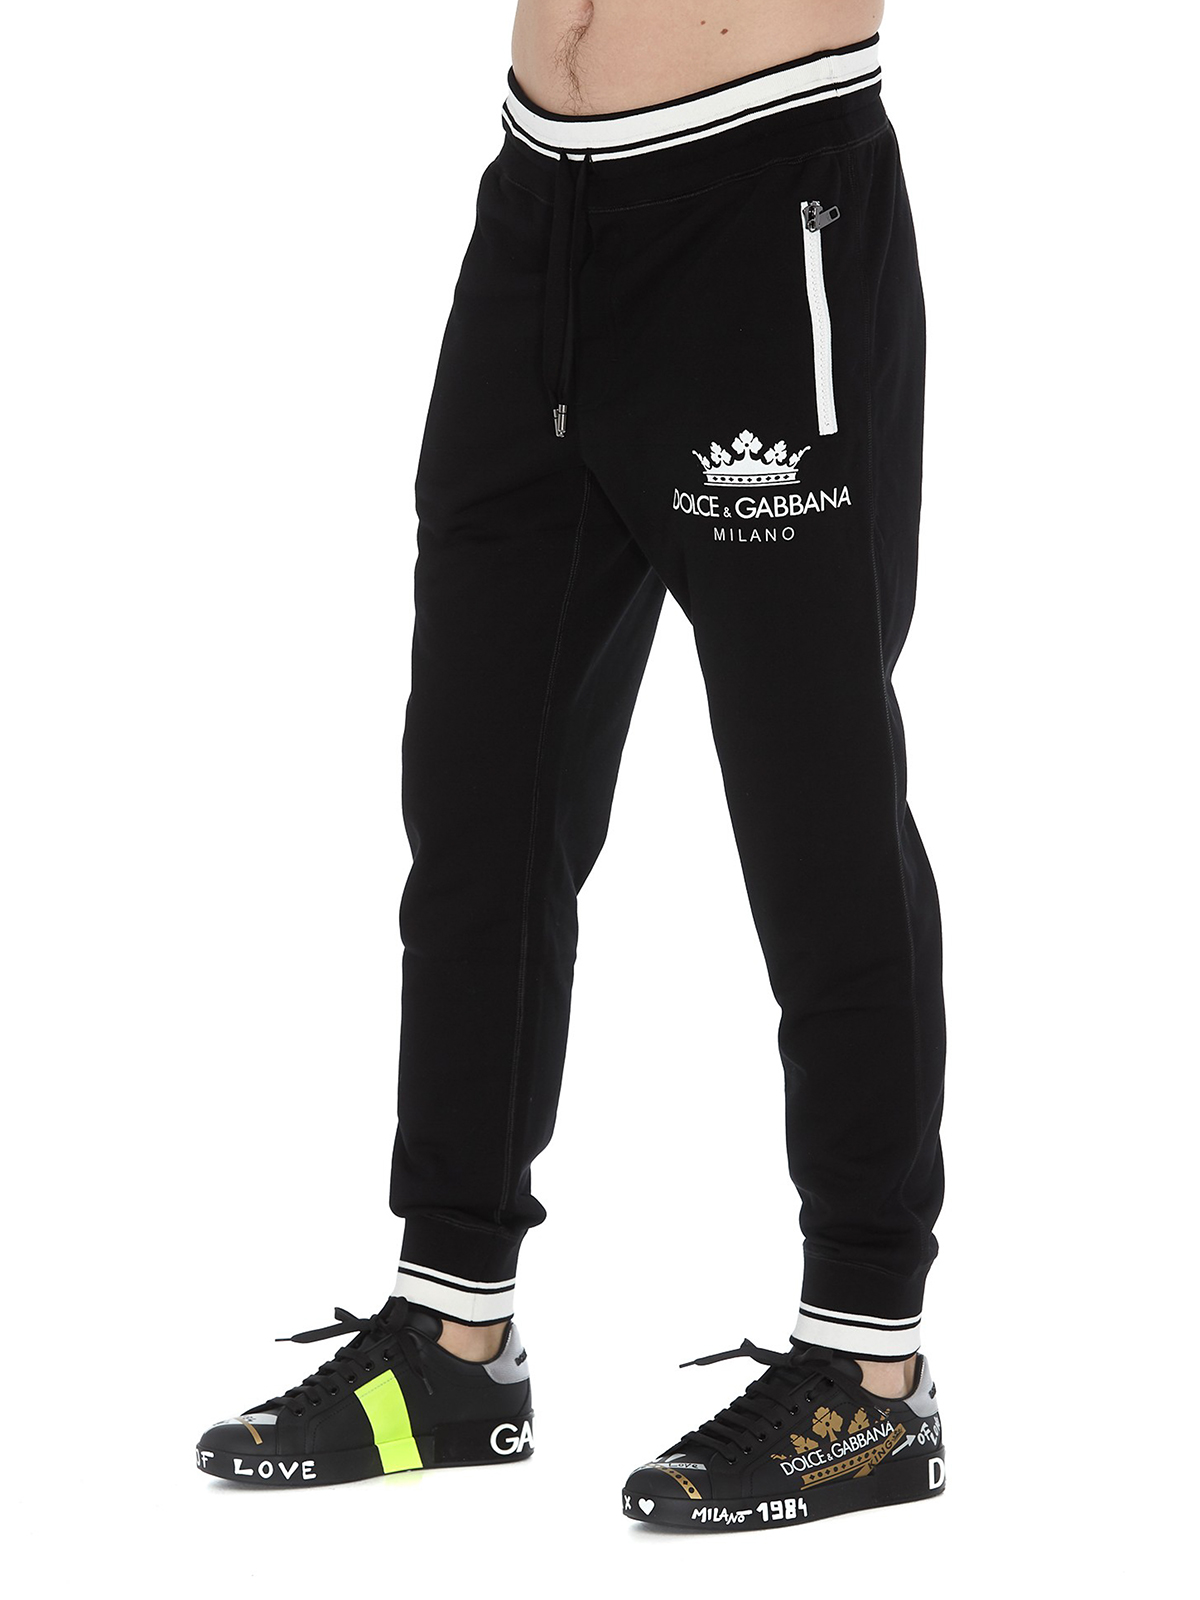 dolce and gabbana tracksuits